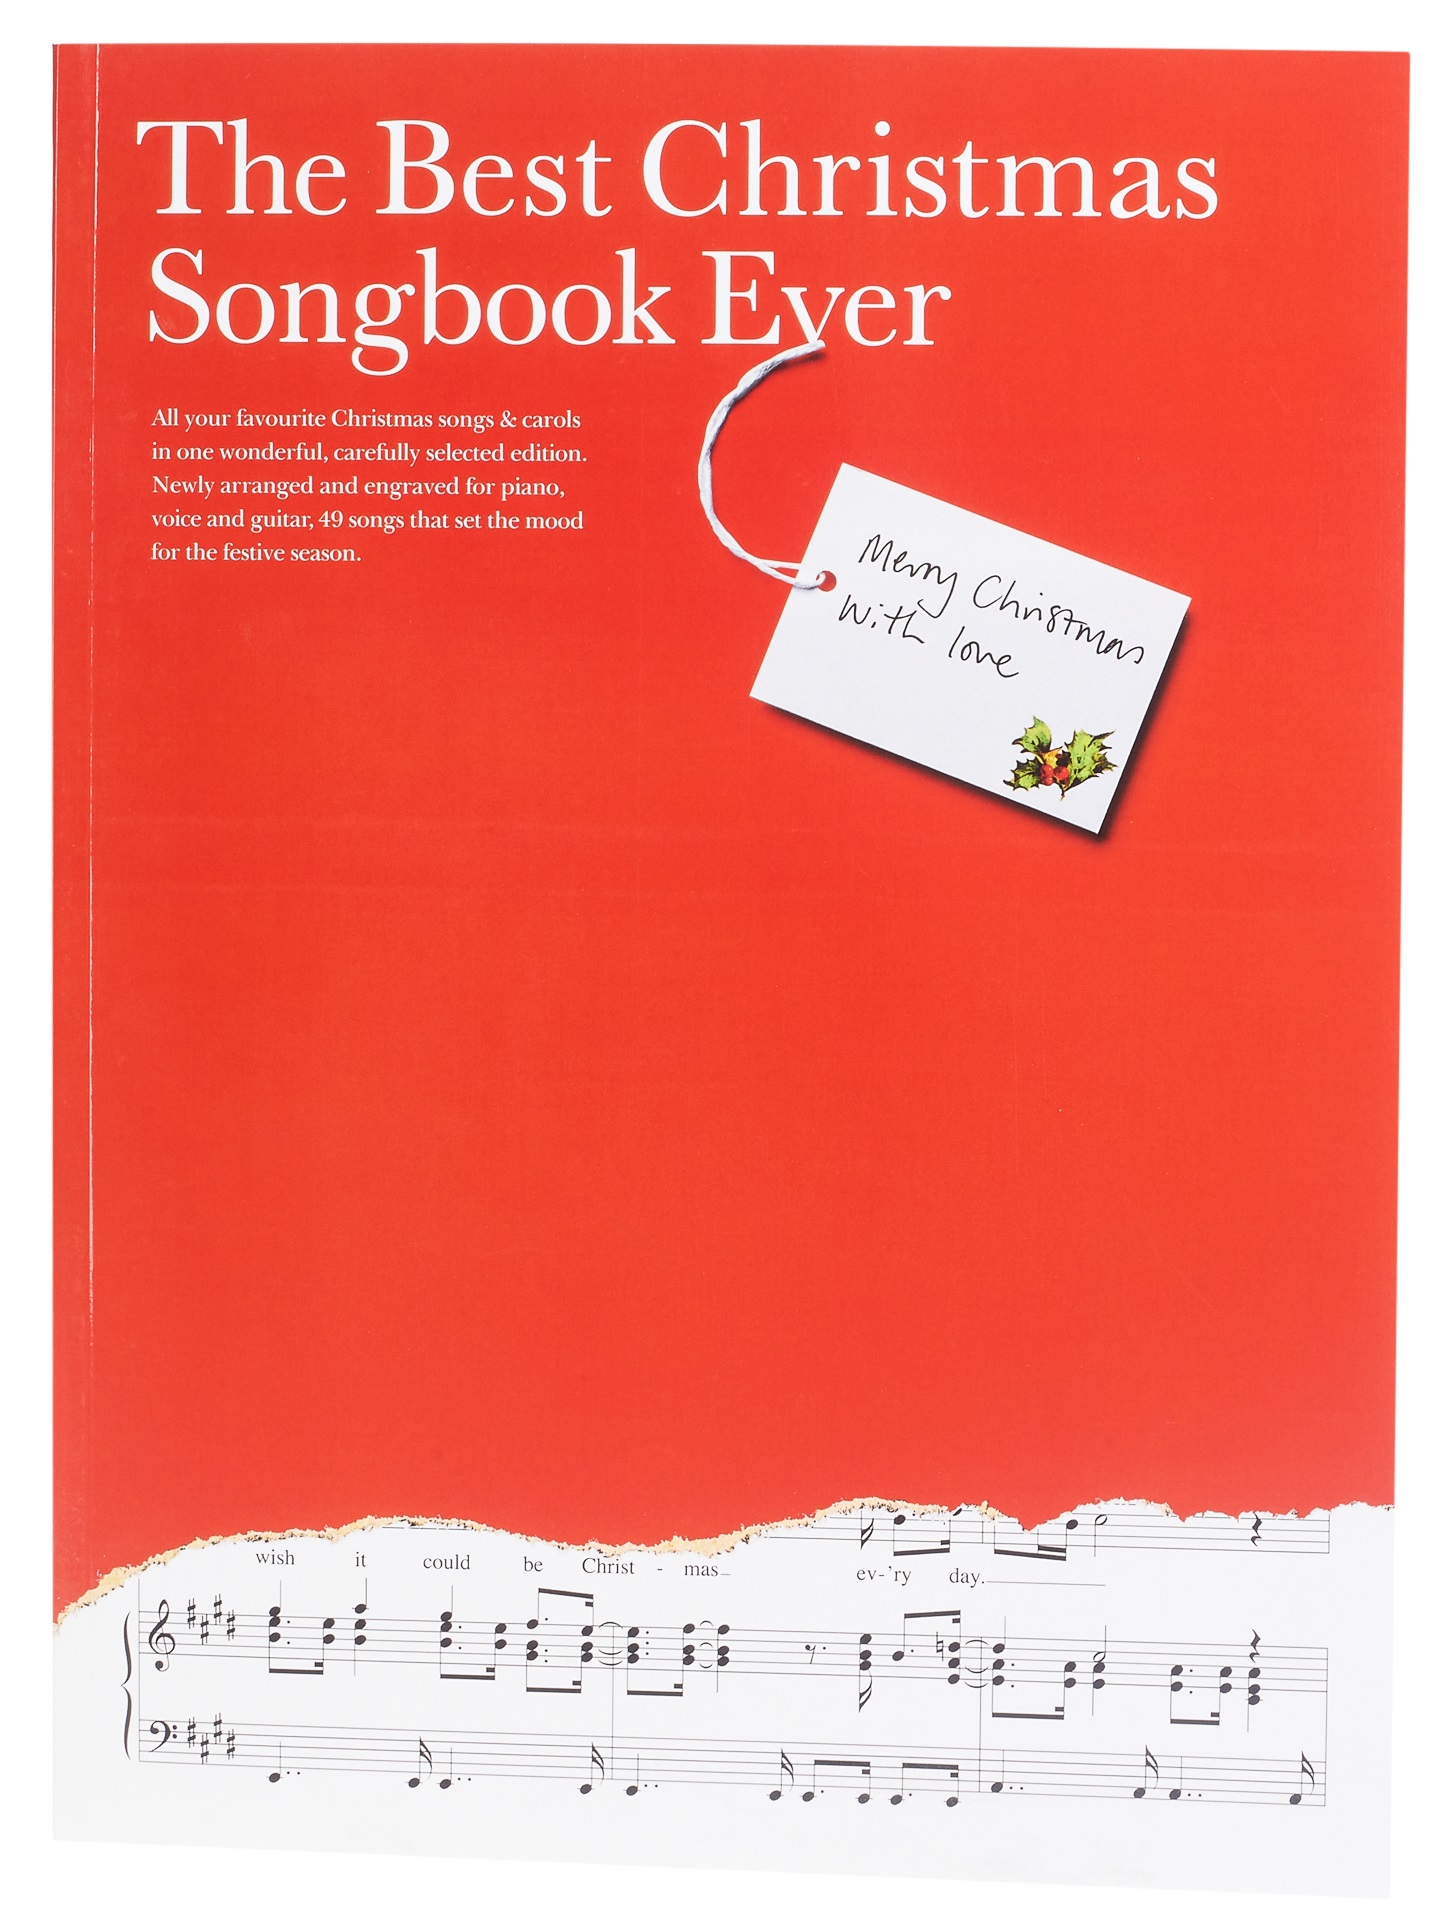 MS The Best Christmas Songbook Ever